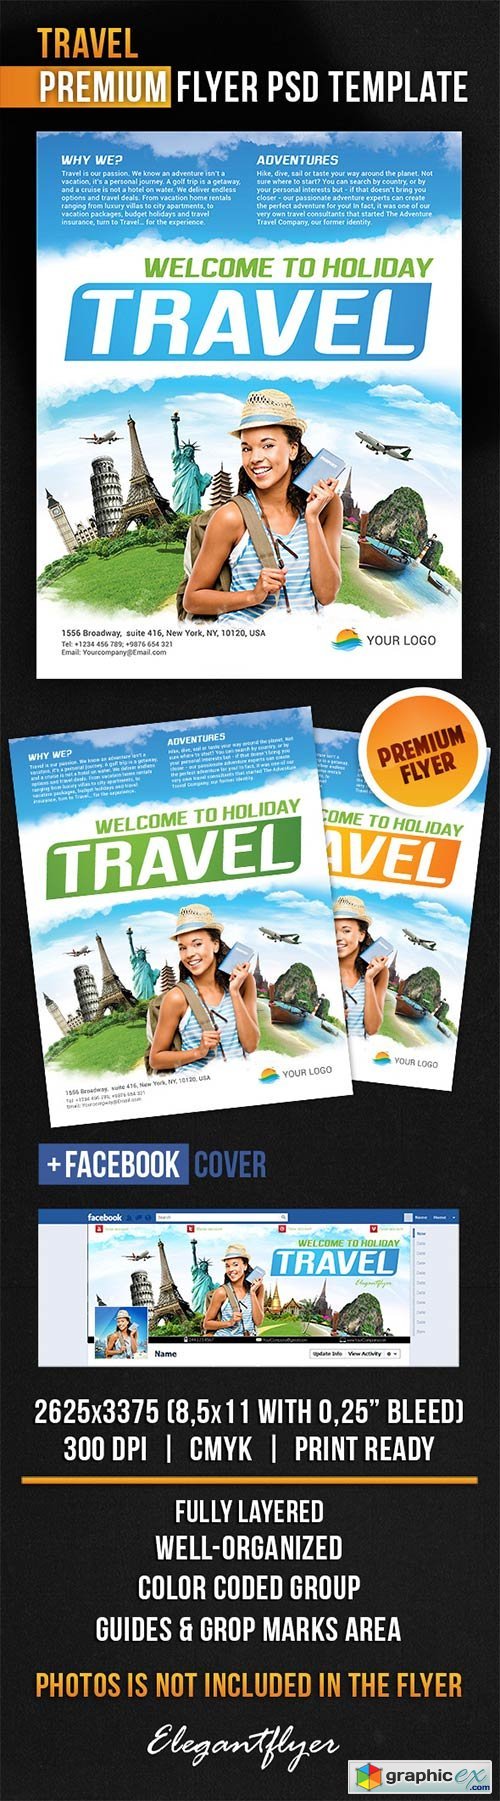 Travel Flyer PSD Template + Facebook Cover